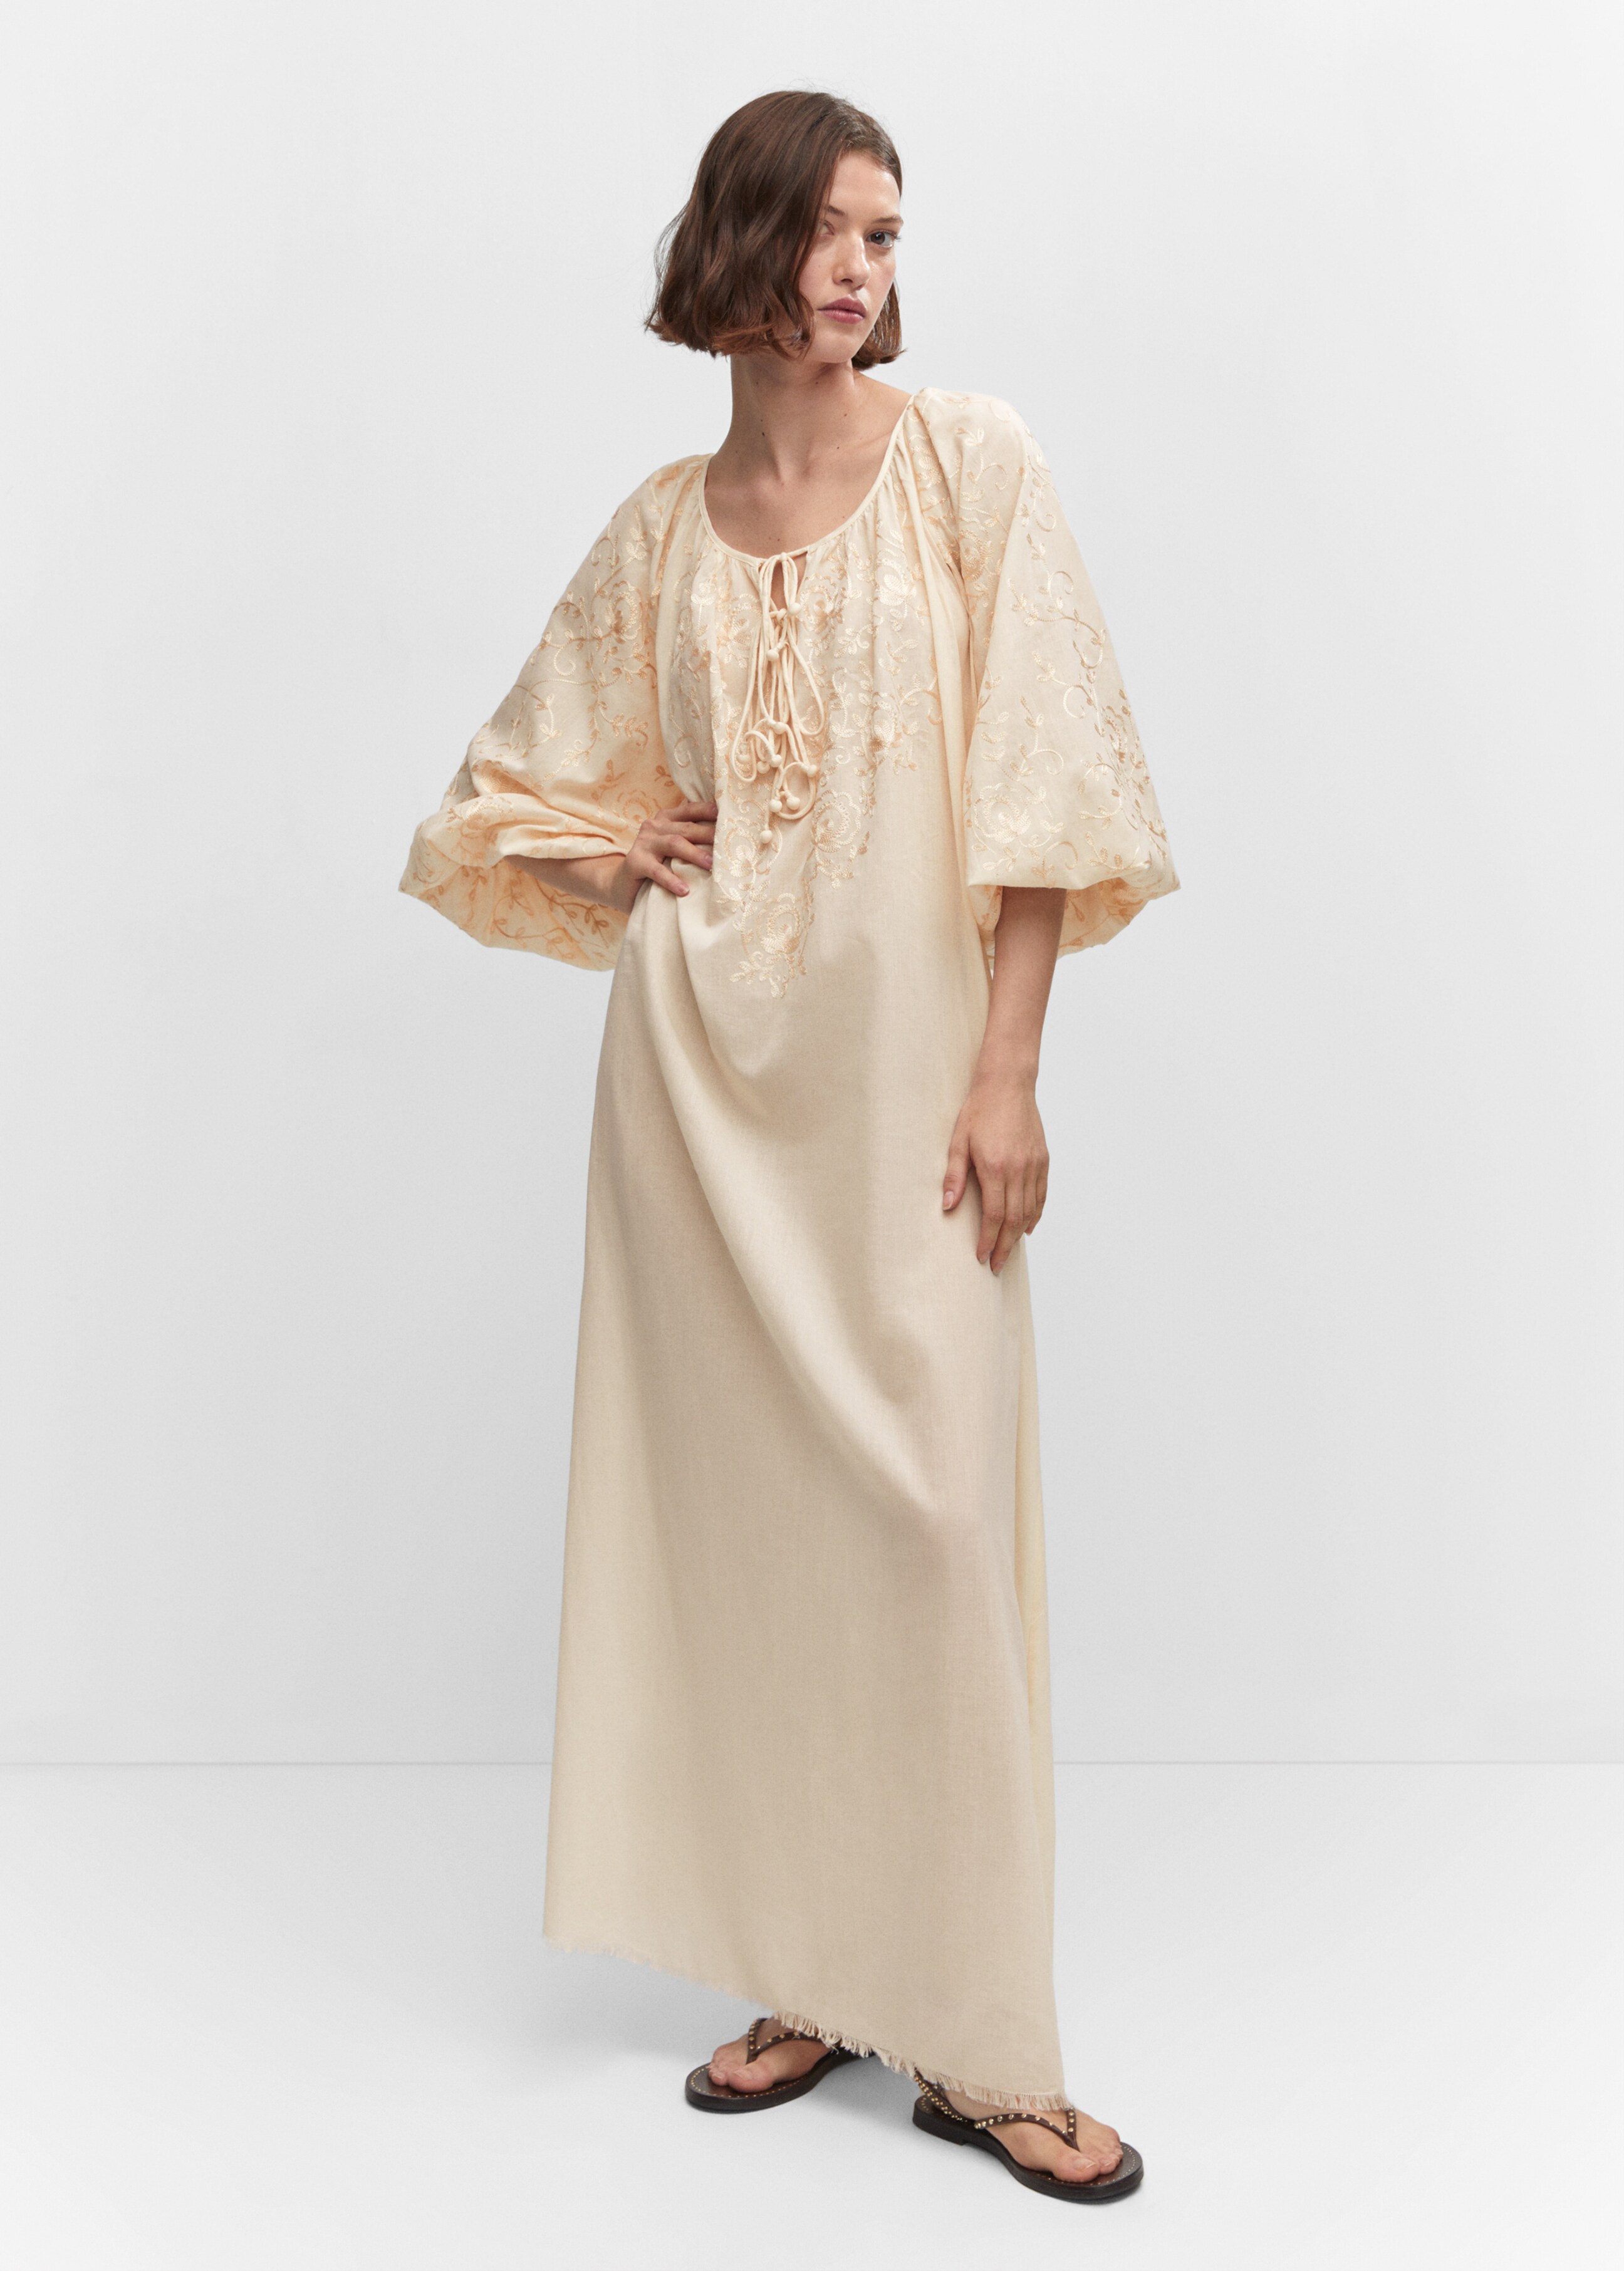 Puff-sleeved embroidered dress - General plane